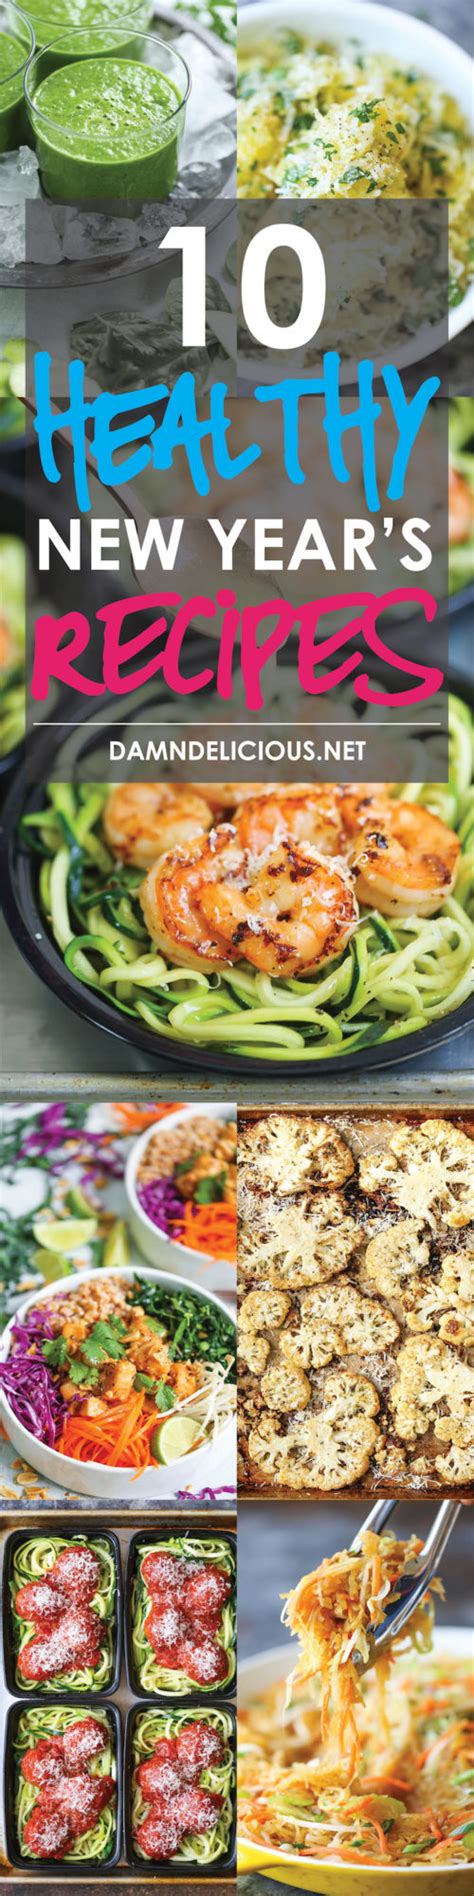 10 Healthy New Years Recipes Damn Delicious